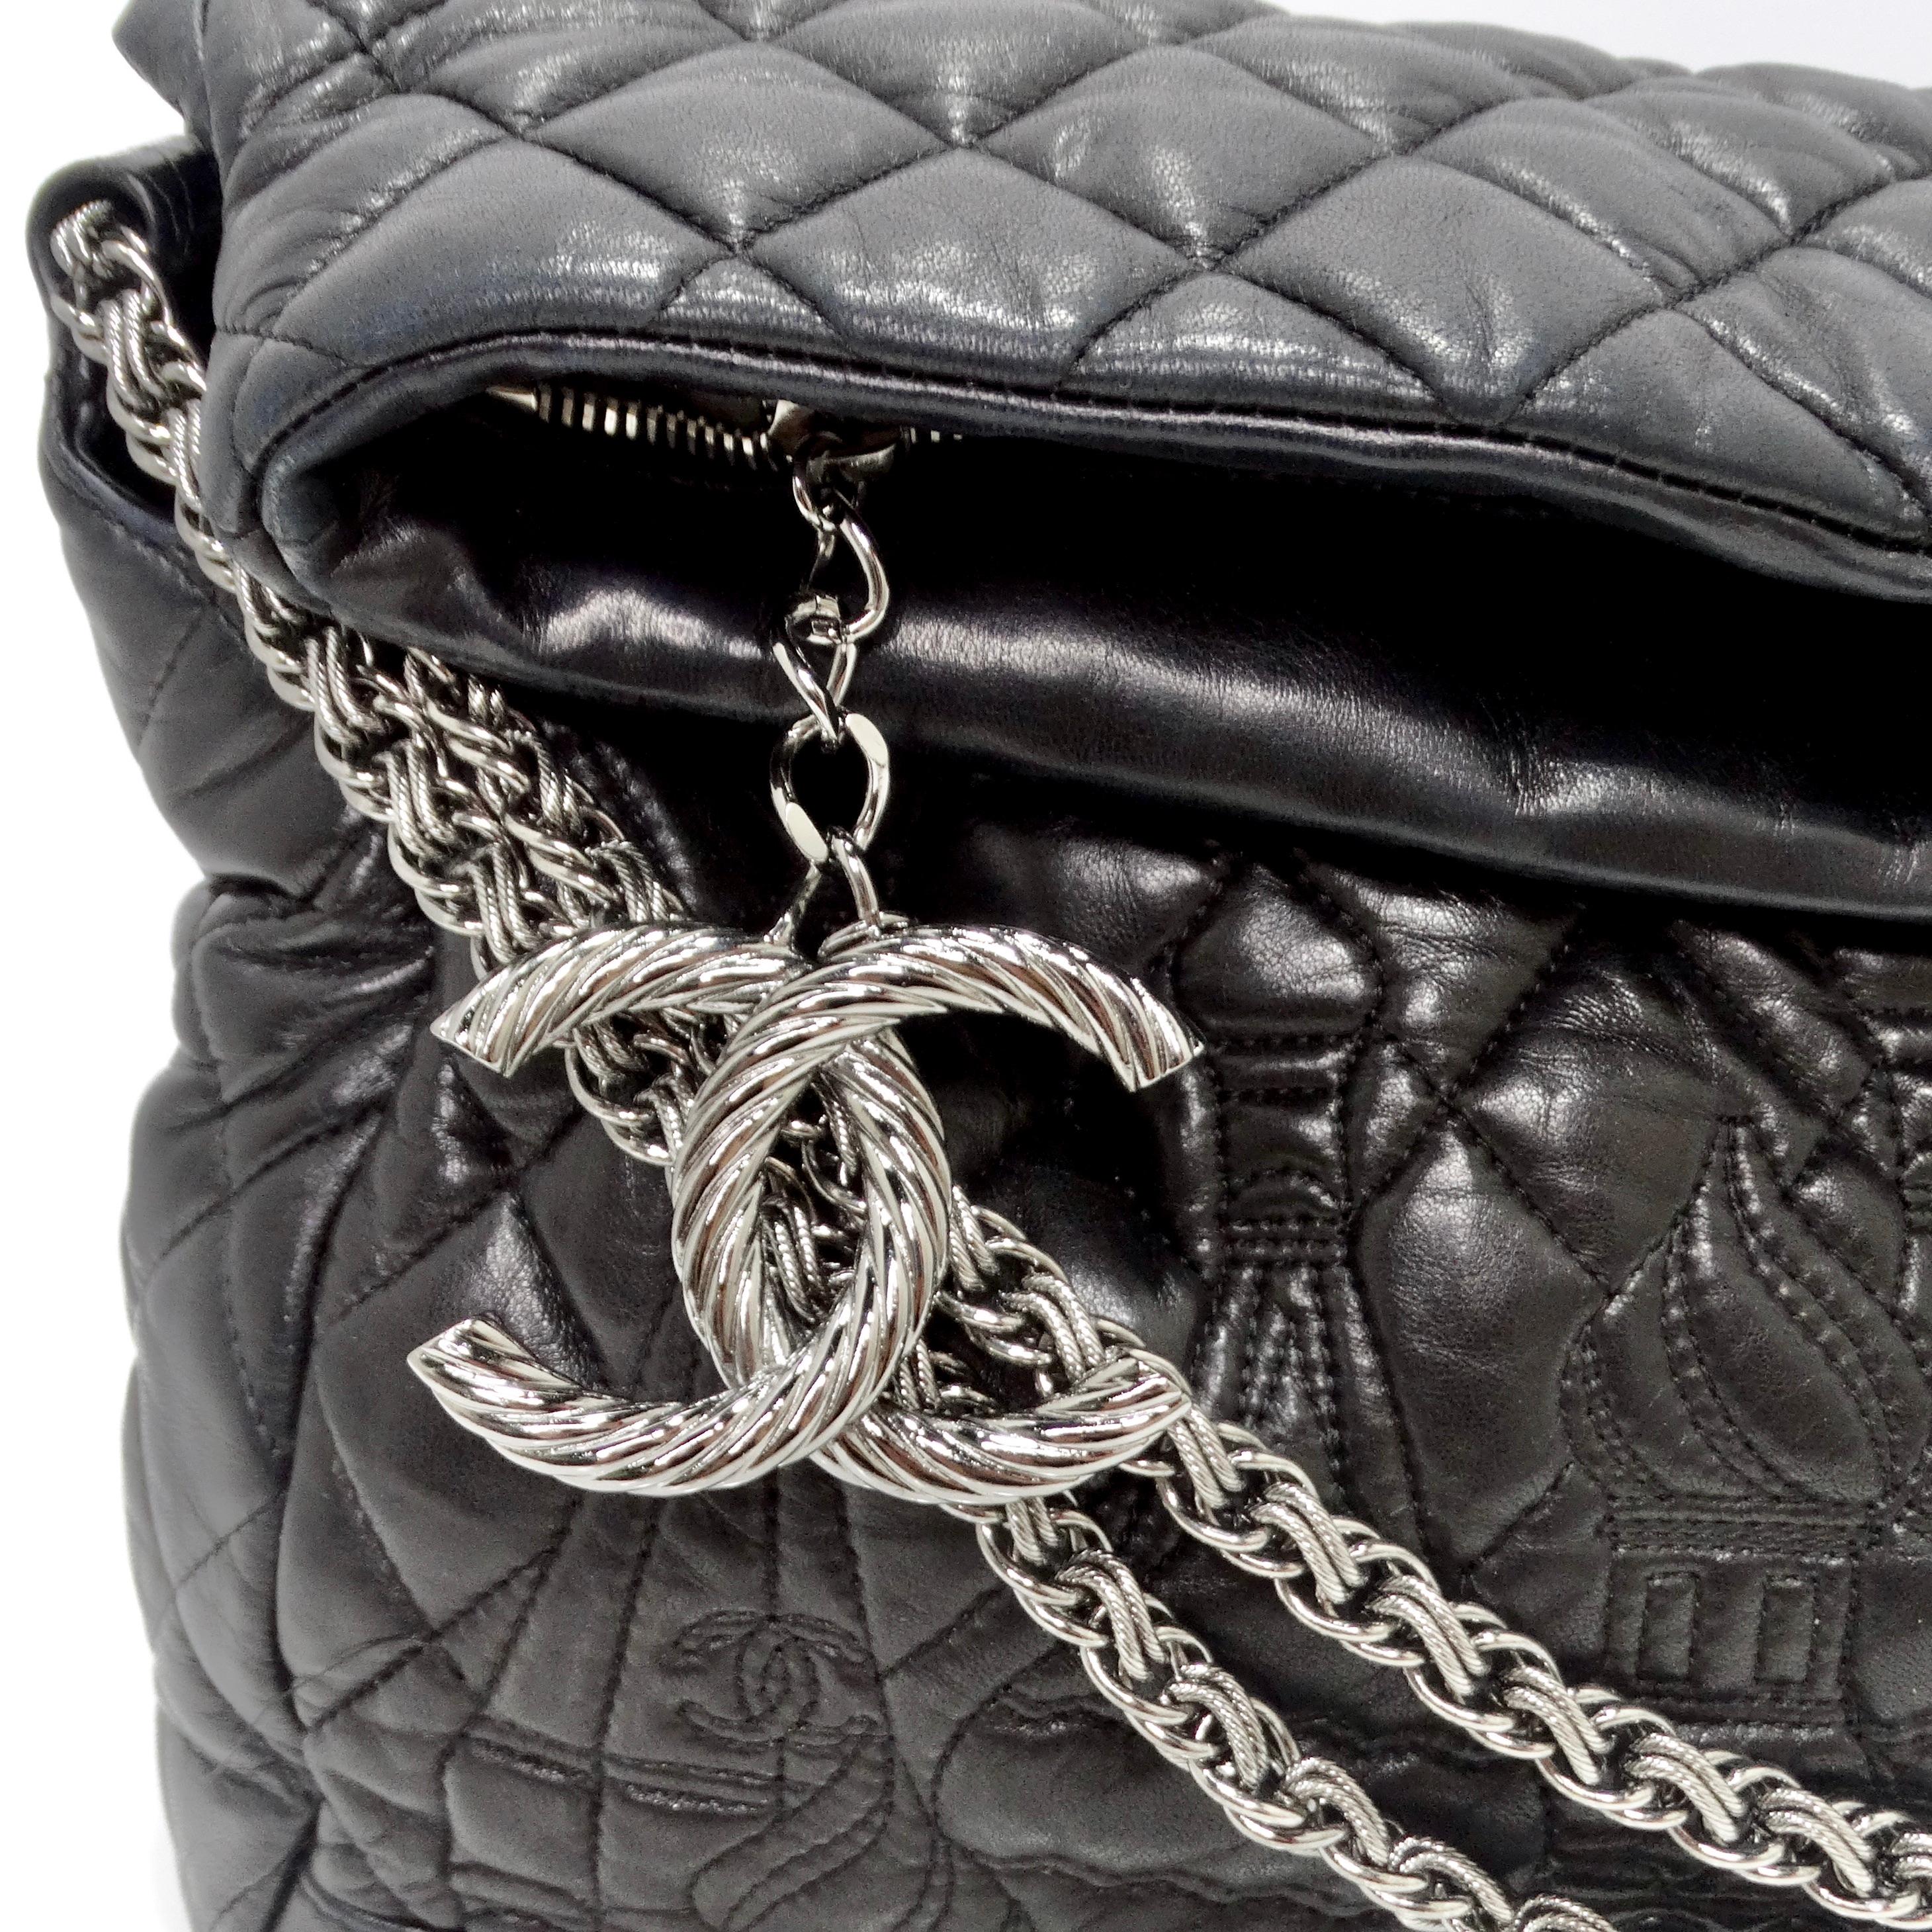 Do not miss out on the Chanel Paris-Moscow Red Square Kremlin Large Shoulder Bag – a captivating piece that seamlessly blends iconic Chanel design with an artisanal twist. The black quilted leather exterior sets the stage for the showstopping